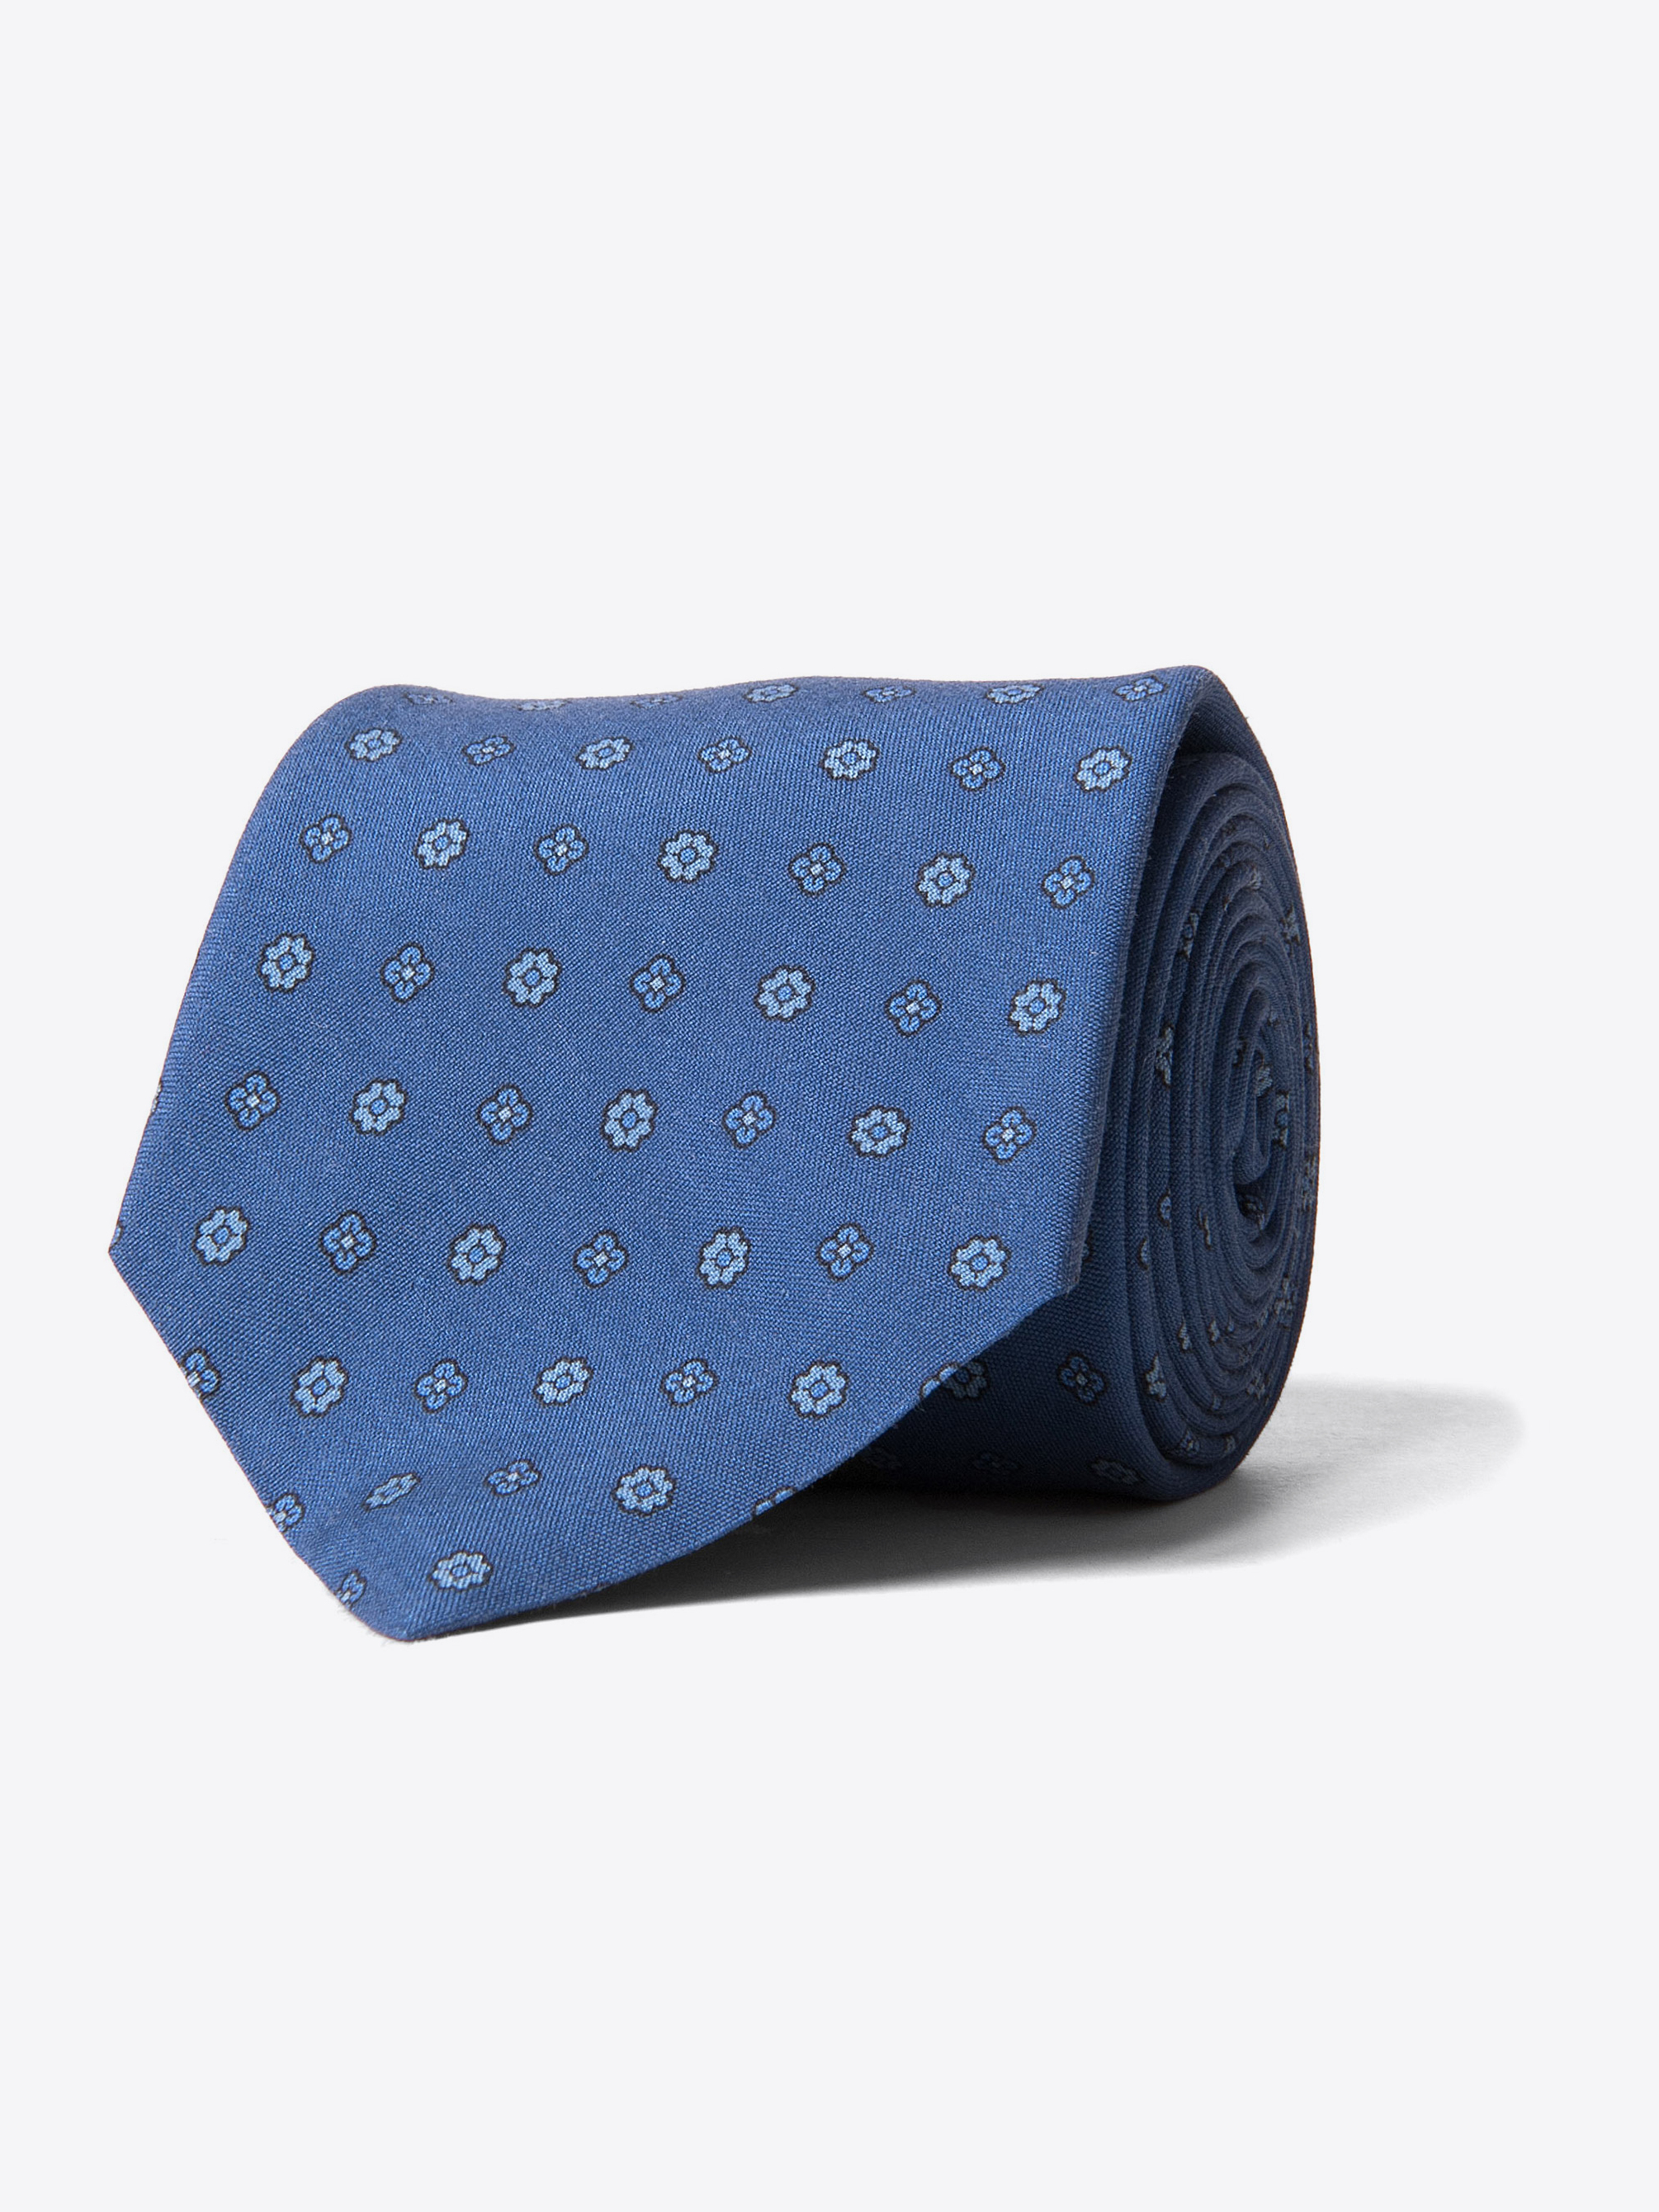 Zoom Image of Ocean Blue Grey and Light Blue Small Foulard Print Tie